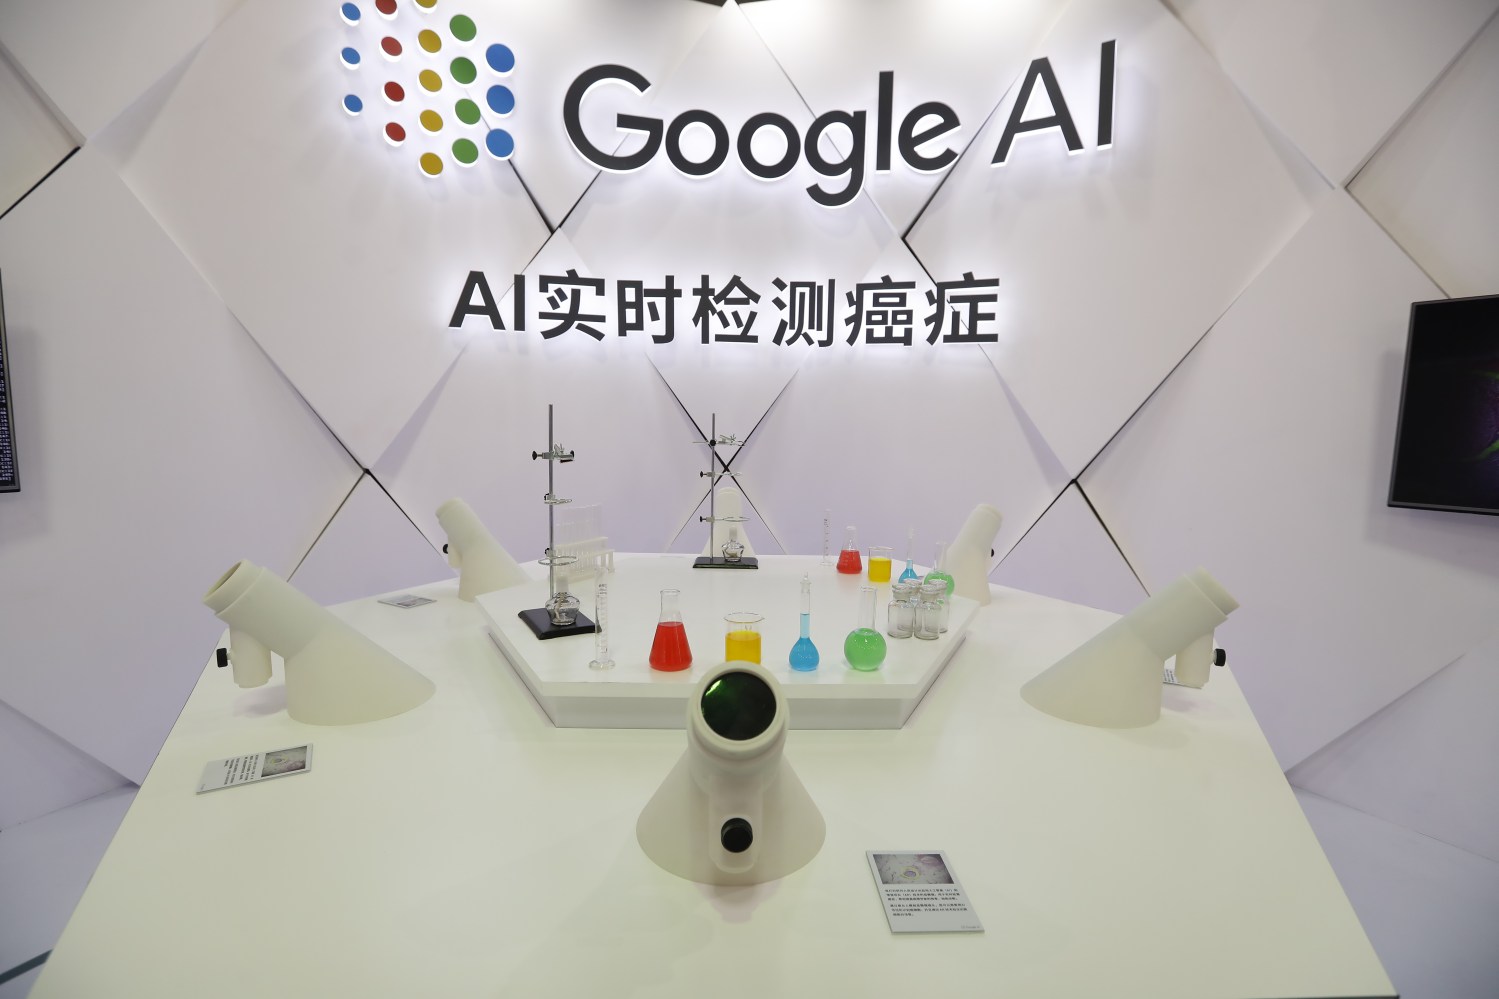 View of the stand for Google's AI technology demonstrates real-time cancer detection before the 2018 World Artificial Intelligence Conference (WAIC) in Shanghai, China, 14 September 2018.The 2018 World Artificial Intelligence Conference will be hold in West Bund, Shanghai from Sept 17 to 19. With the theme of "A new era empowered by artificial intelligence," the conference gathers AI scientists, entrepreneurs and government officials to share their views on the industry. Featuring "sophistication, globalization, specialization and marketization" prominently, the conference will have a main forum, several theme forums and will host innovation competitions as well as exhibitions to show cutting-edge AI technologies, applications and products. More than 150 companies at the forefront of AI will take part in the conference, including Alibaba, Baidu, Tencent, Google and Microsoft. No Use China. No Use France.